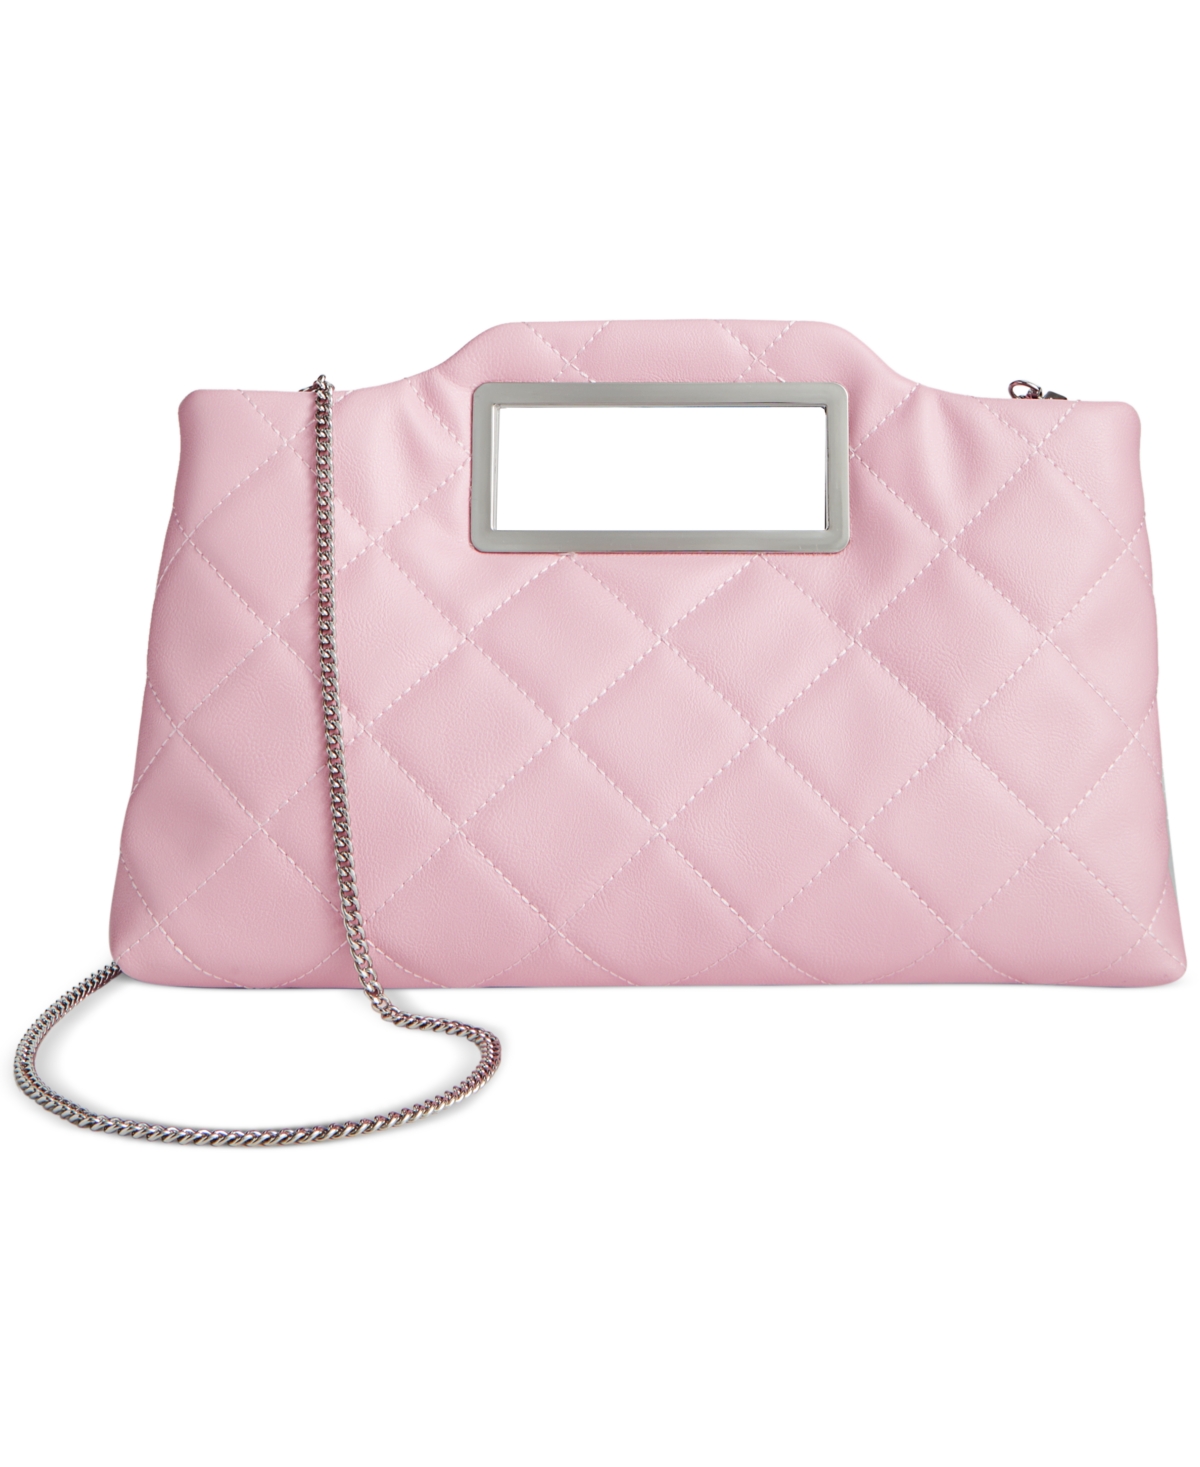 Juditth Handle Quilted Clutch, Created for Macy's - Pink Quartz